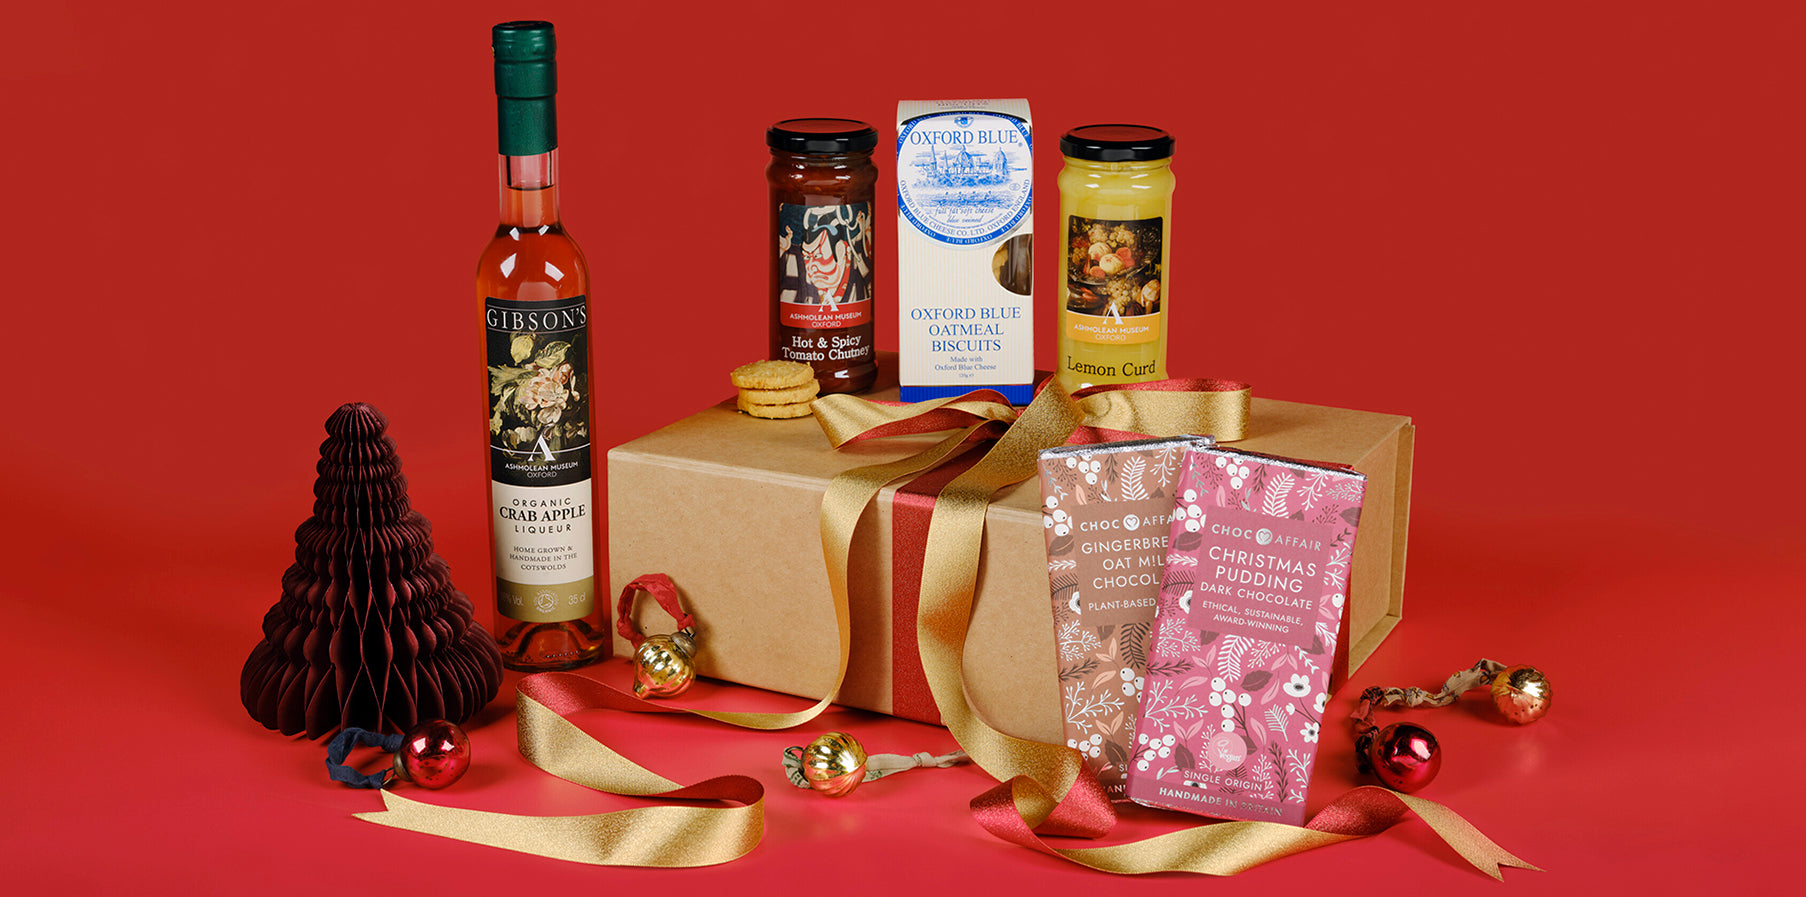 Gibson's Liqueur Hamper, which also includes two preserves, two festive chocolate bars and a pack of Oxford Blue oatmeal biscuits. Decorated with gold ribbon.